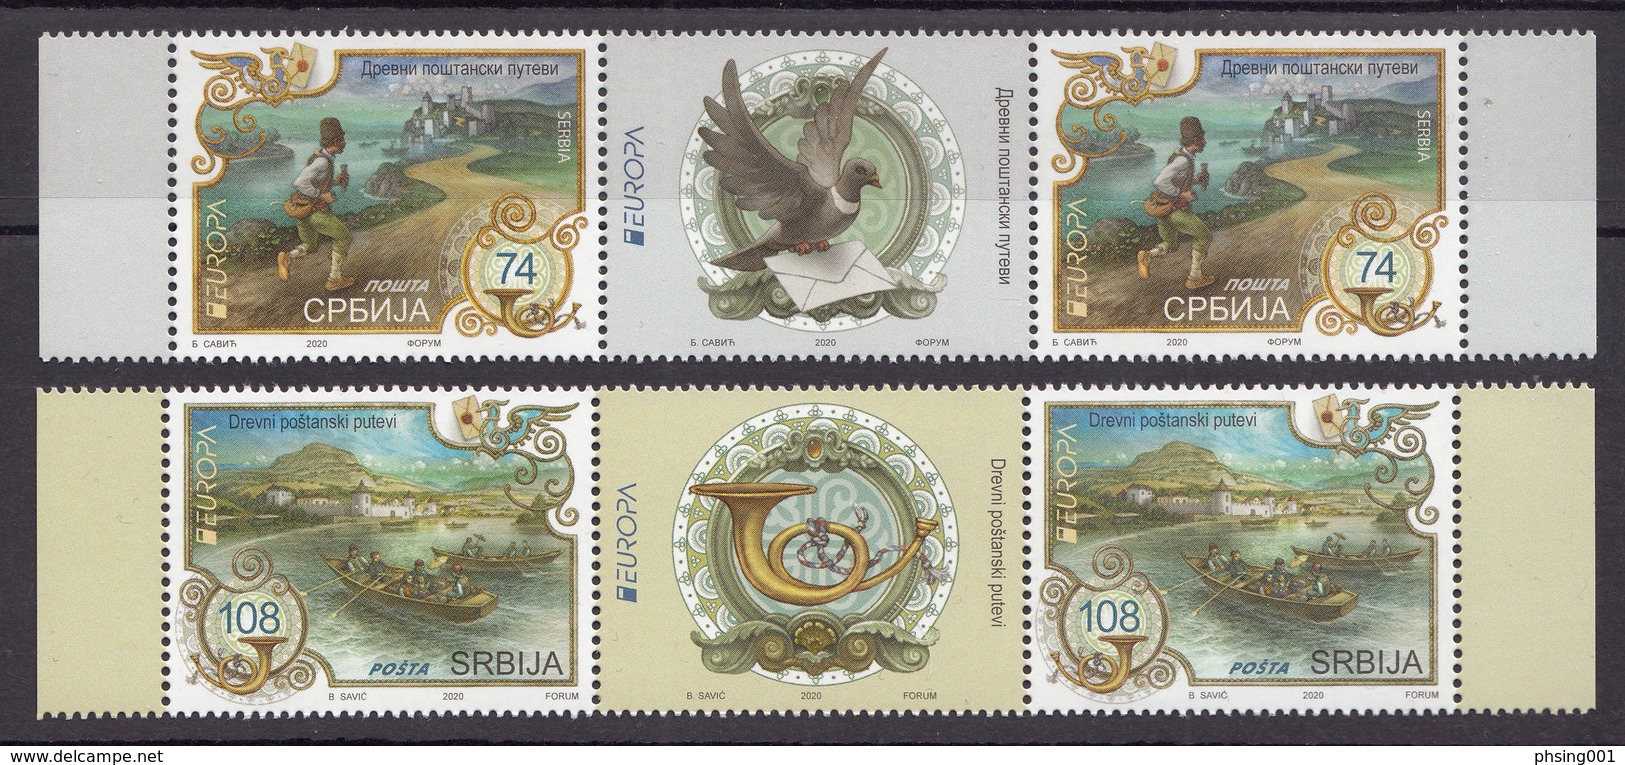 Serbia 2020 Europa CEPT Ancient Postal Routes Messenger Boat Fortress Birds Carrier Pigeon Postal Horn, Middle Row MNH - 2020